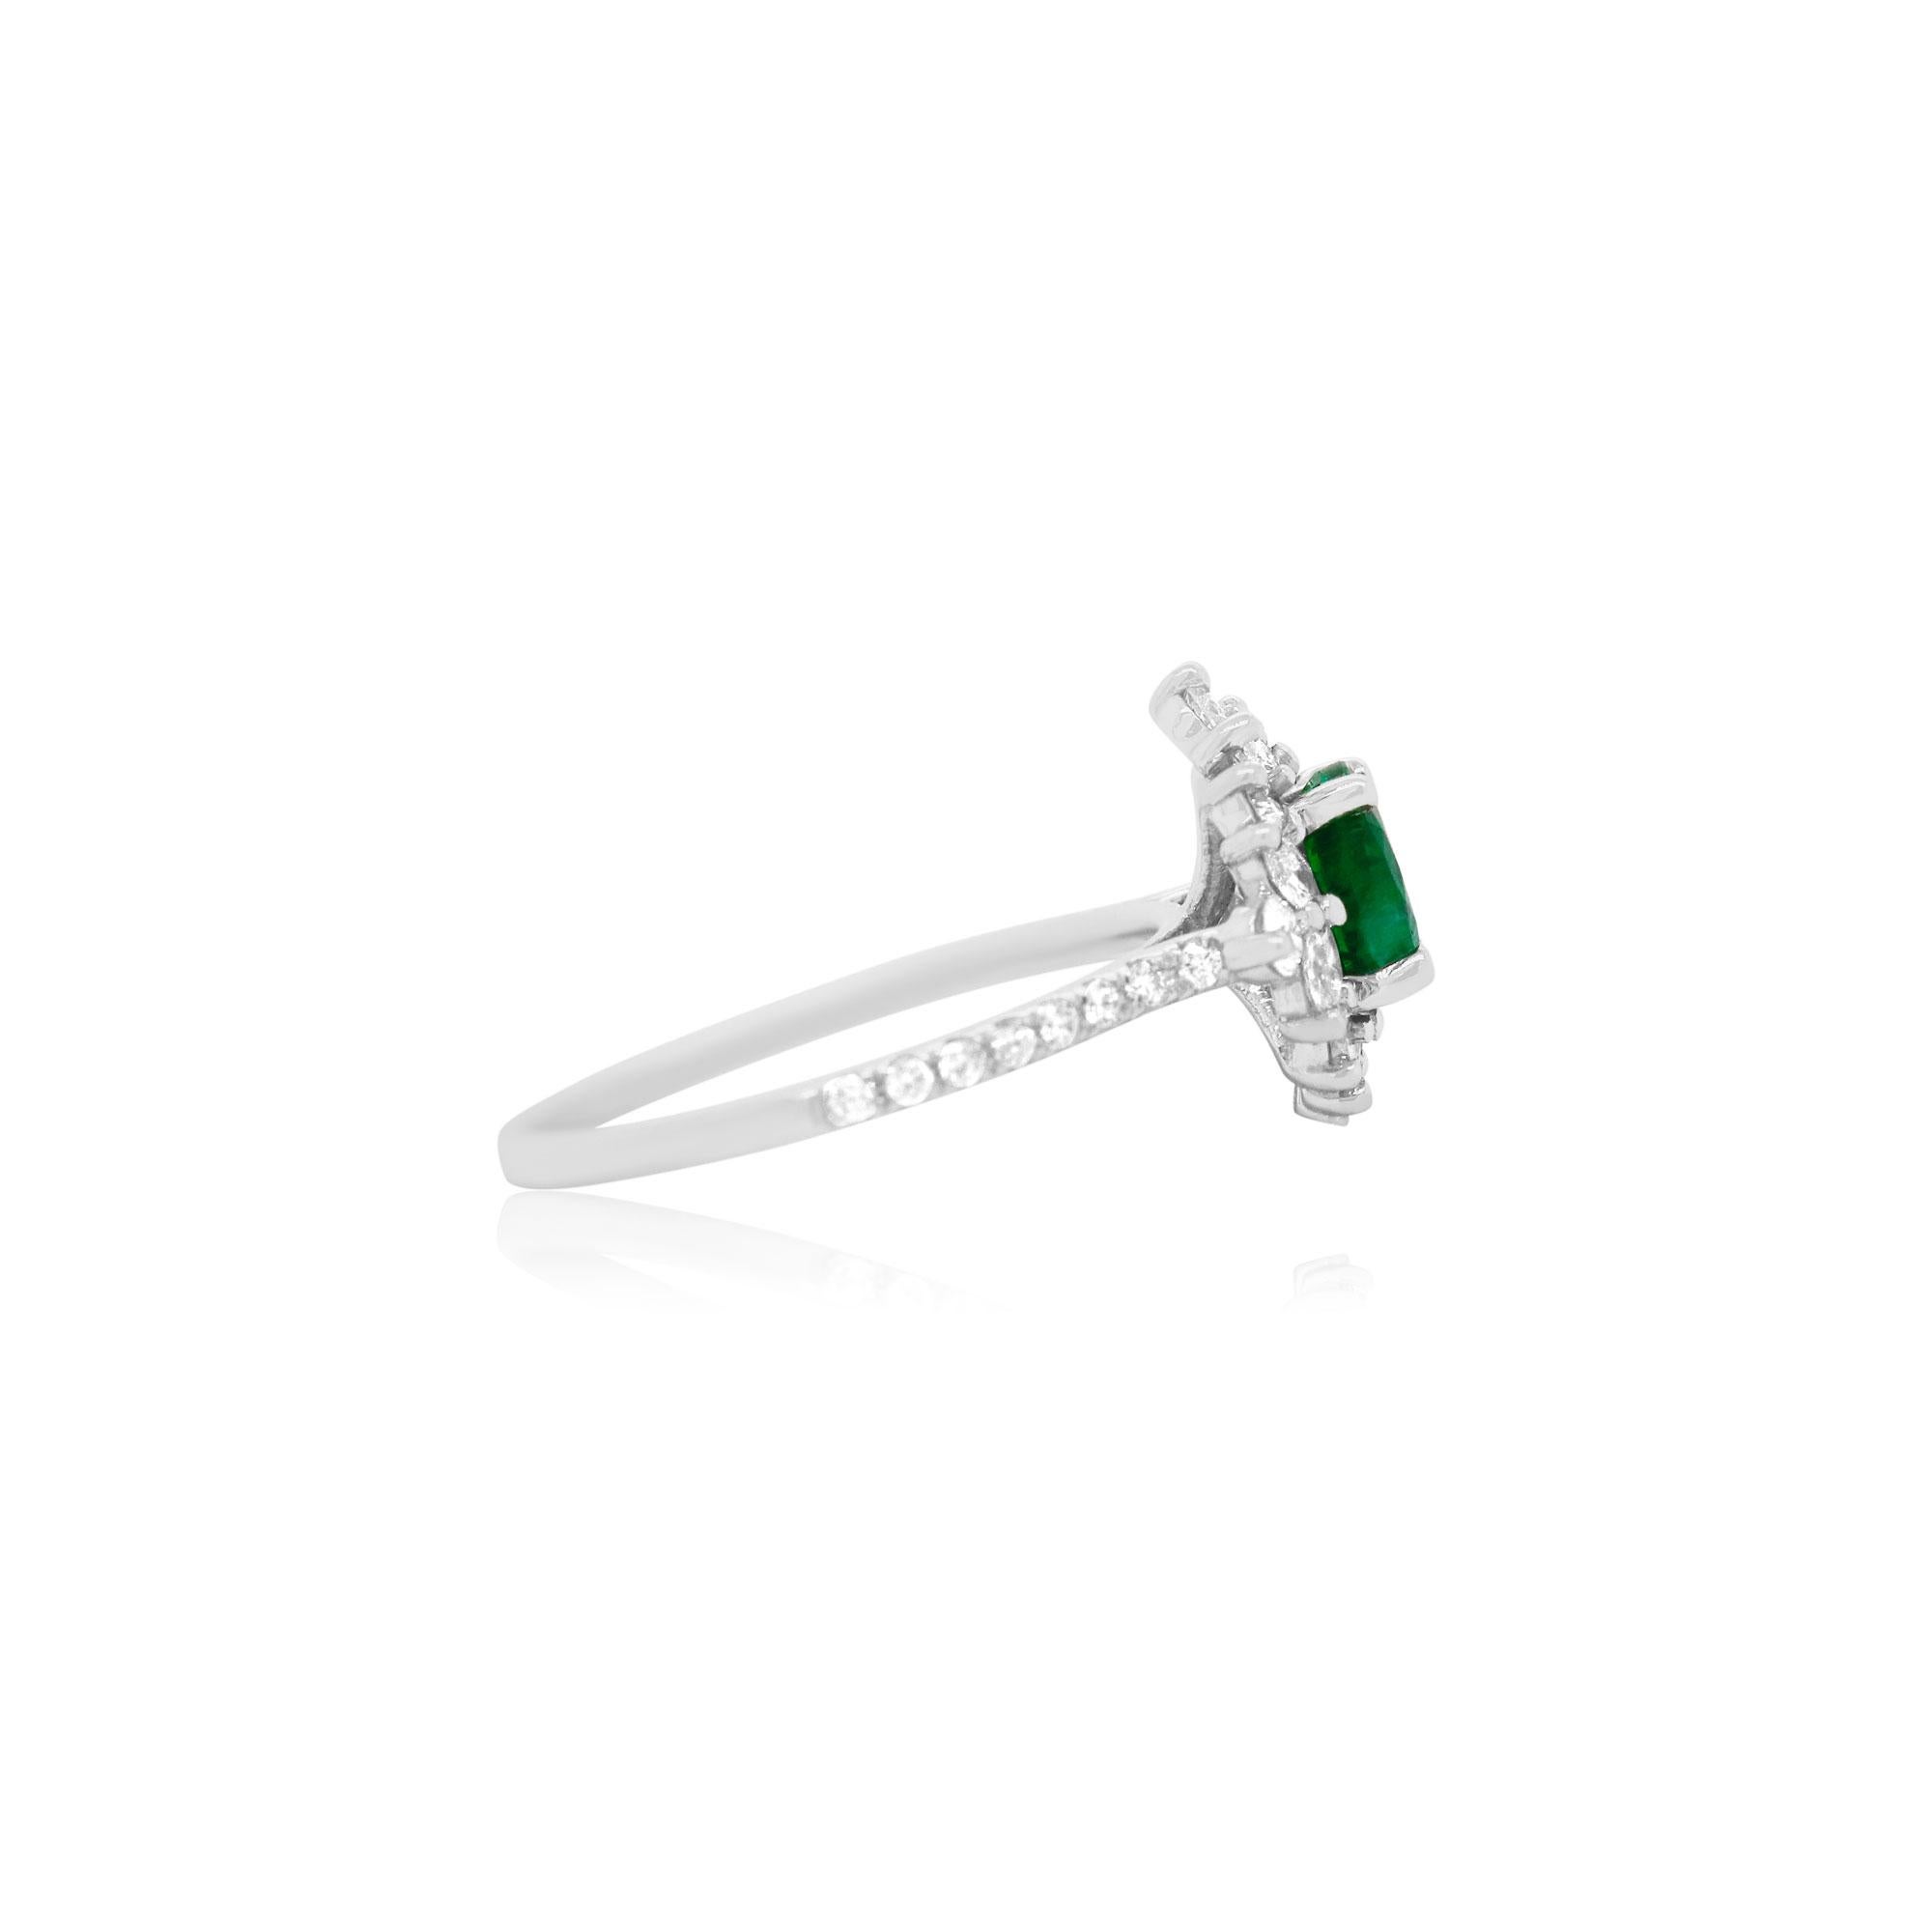 Material: 14K White Gold
Center Stone Details: 1 Round Emerald at 1.15 Carats at 7mm Size 
Side Stone Details: 8 Marquise White Diamonds at 0.26 Carats Total Weight 
24 Round Brilliant White Diamonds at 0.43 Carats Total Weight

Fine one-of-a-kind